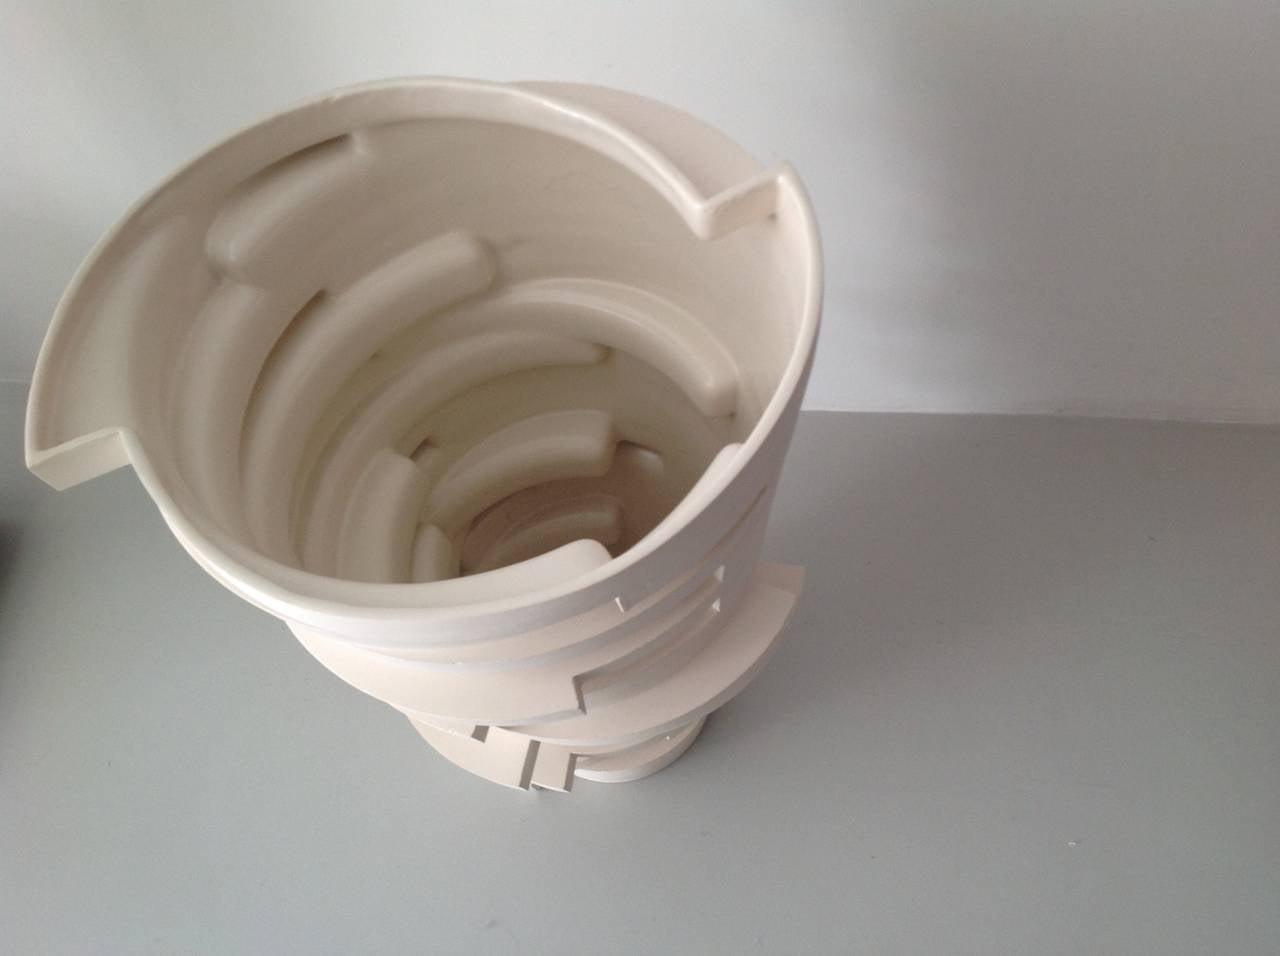 Molded Deconstructed Ceramic Vase by Ronald Meulman For Sale